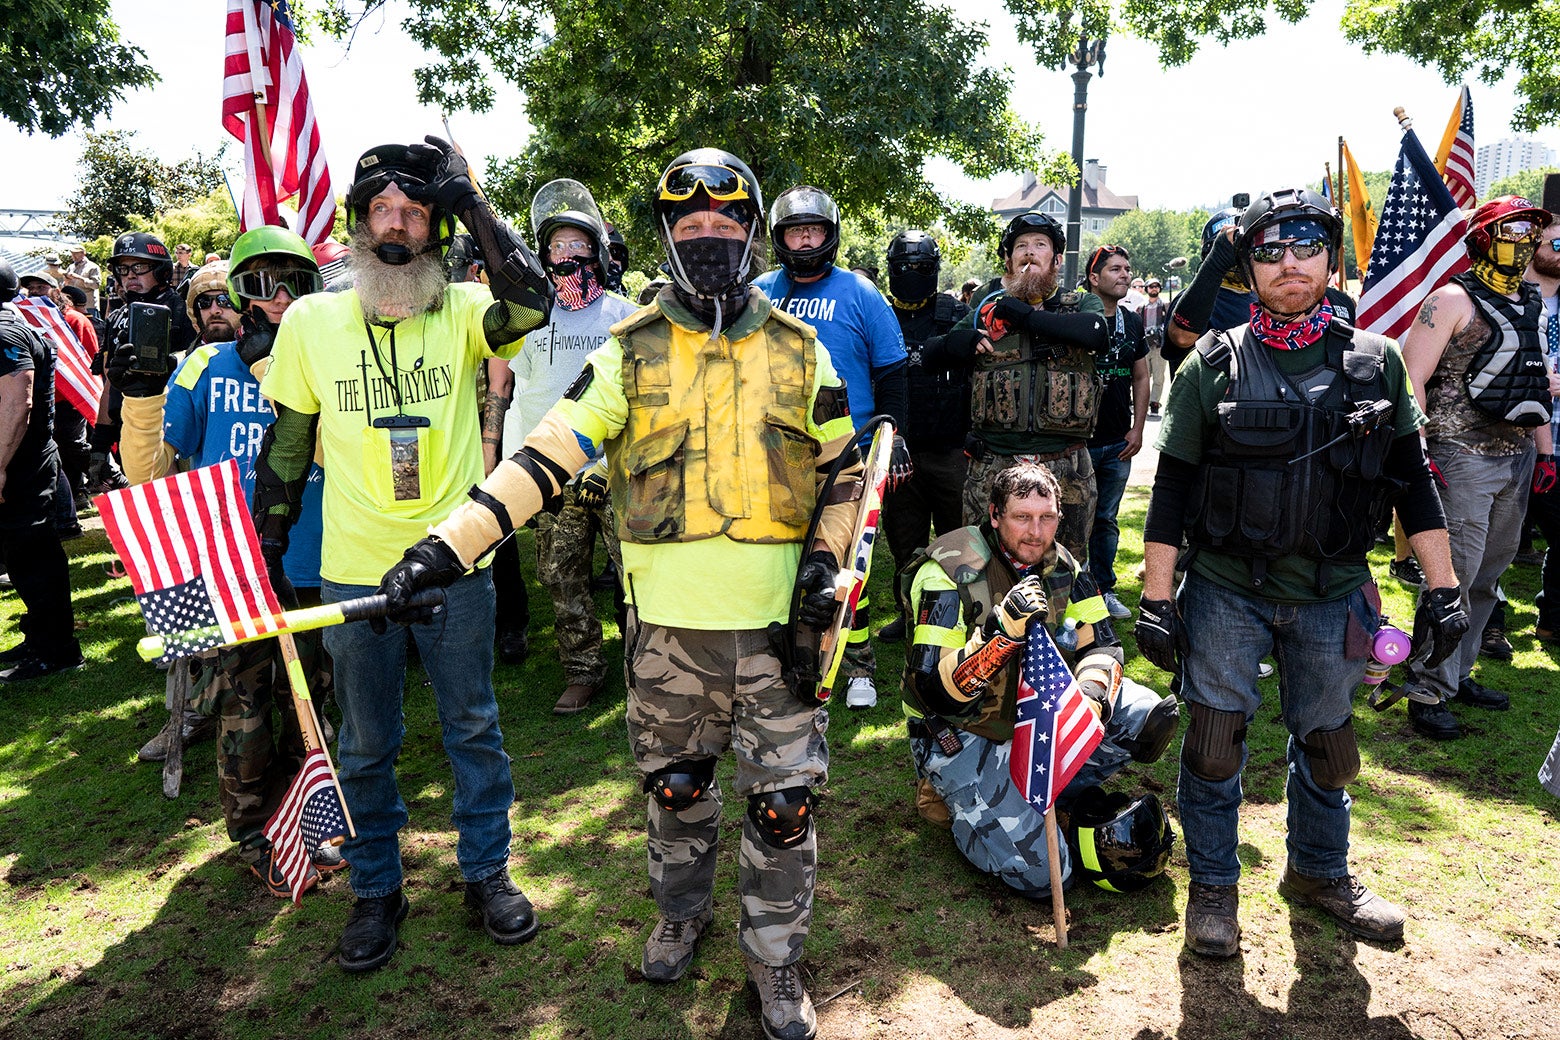 The Proud Boys, a far right group supportive of President Donald Trump, organized the Patriot Prayer Rally for far right protesters.